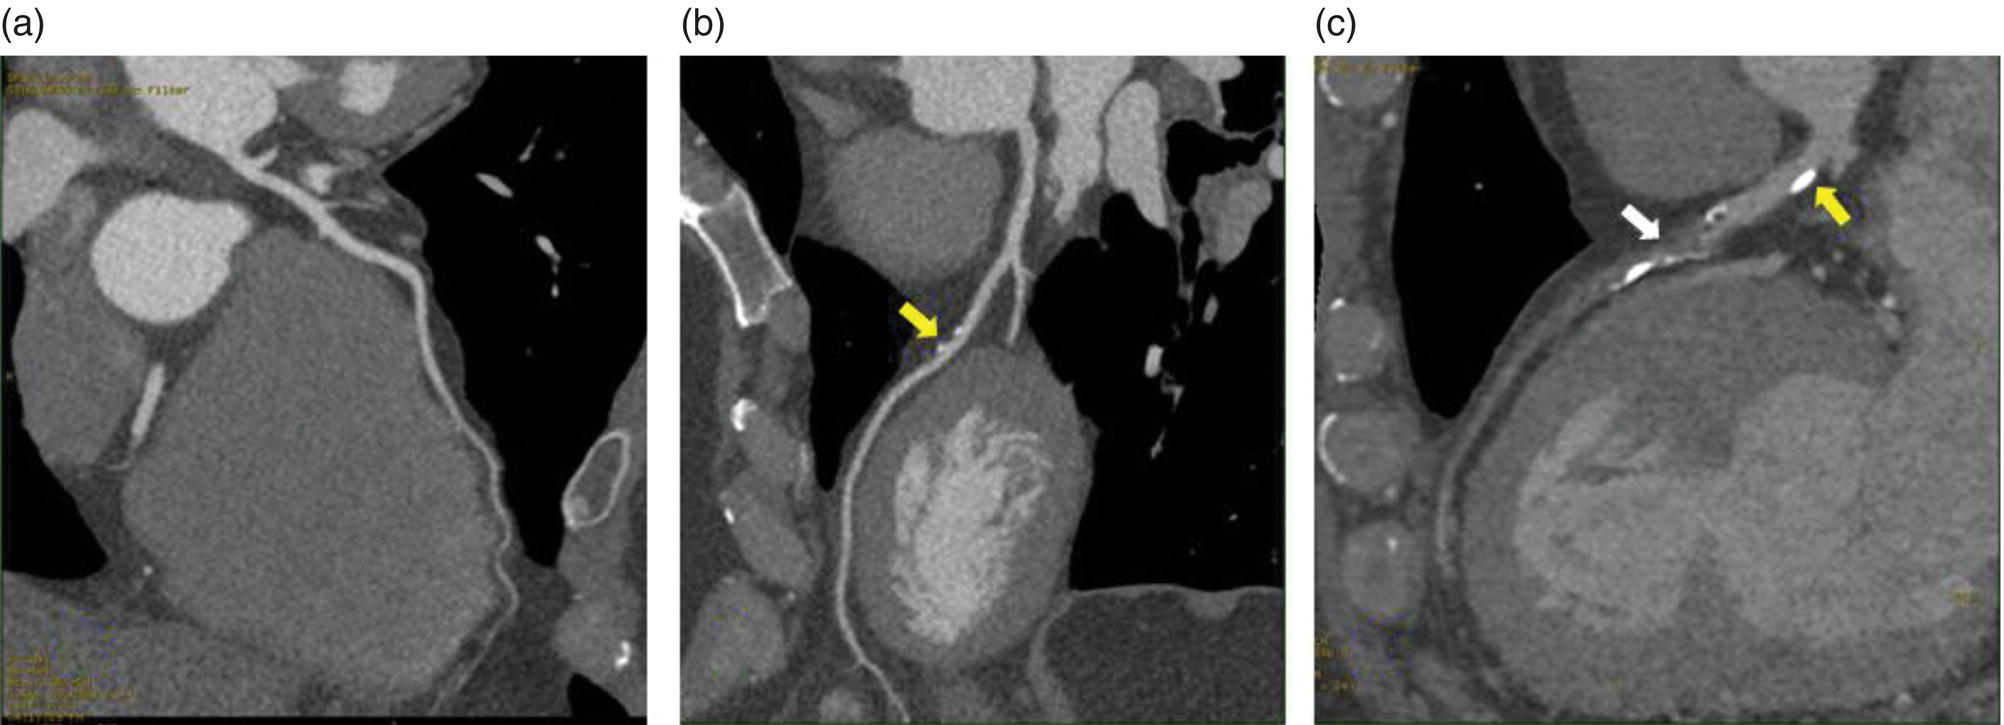 Schematic illustration of CCTA of the left anterior descending coronary artery (LAD) of three different patients: (A) normal LAD, (B) mild noncalcified plaque (yellow arrow), and (C) calcified nonobstructive plaque (yellow arrow) and mixed plaque resulting in occlusion of the mid LAD (white arrow).